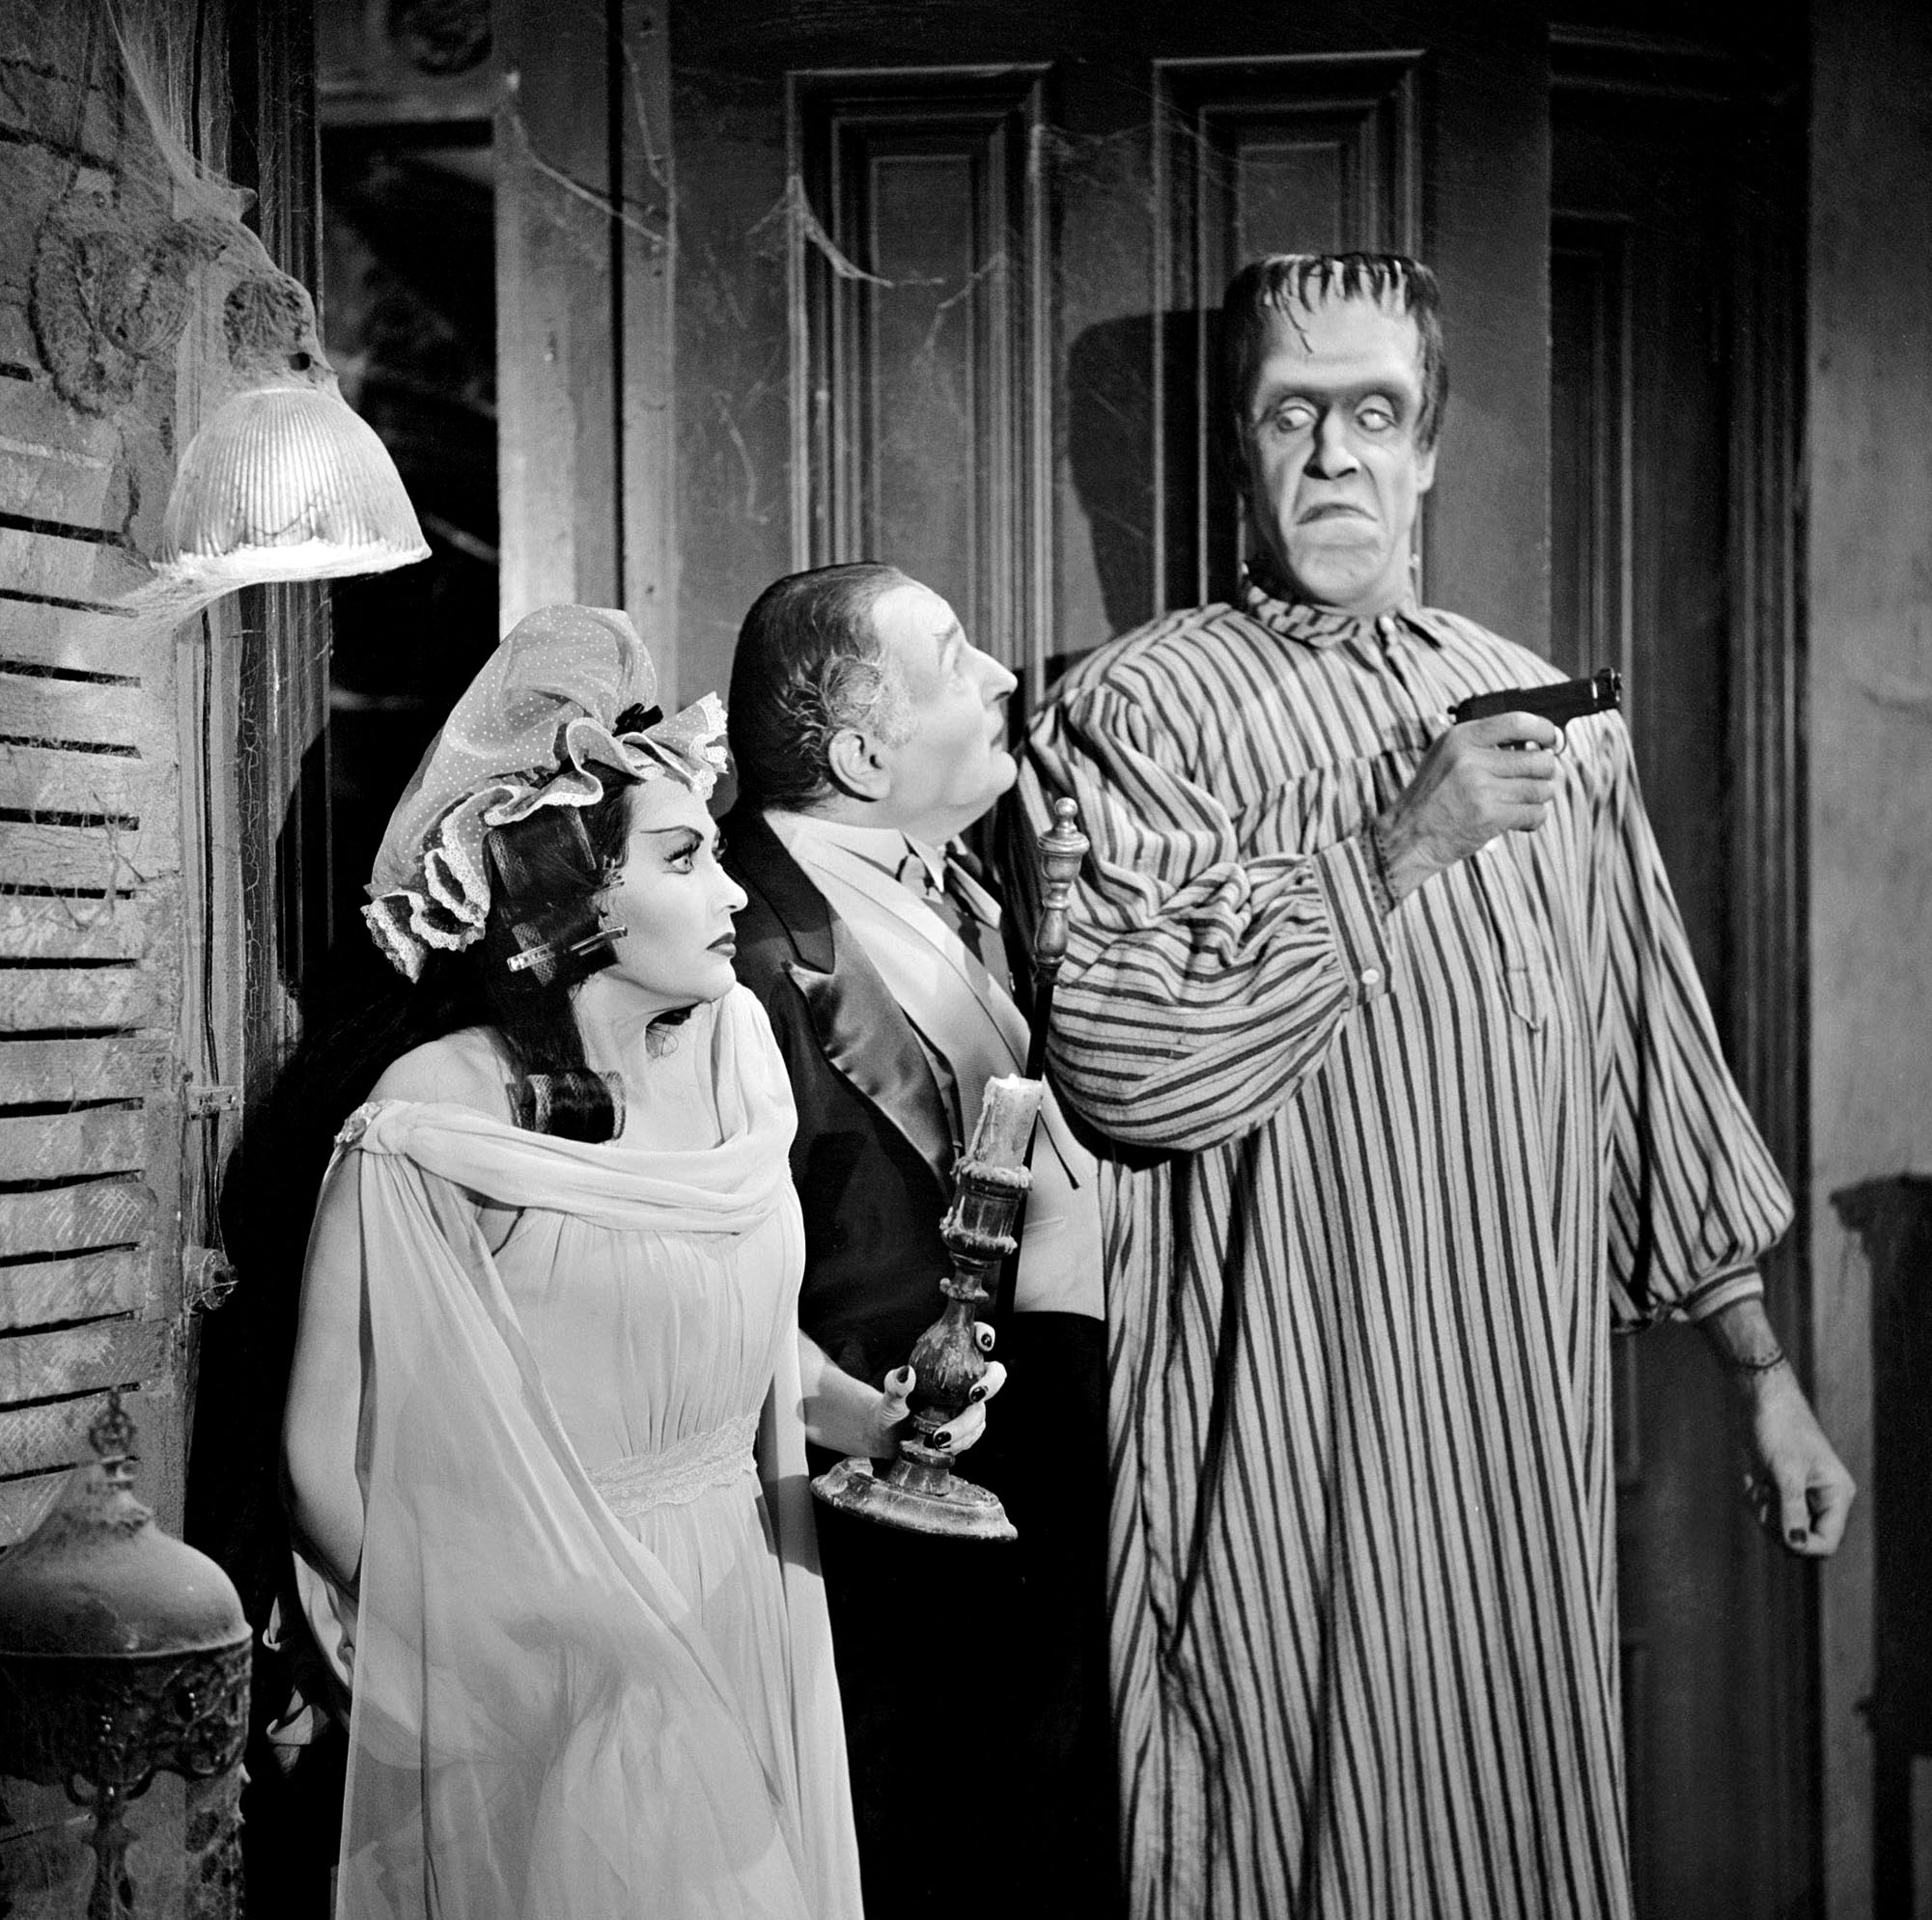 'The Munsters' stars Yvonne De Carlo, Al Lewis, and Fred Gwynne in a black and white photo from the show.